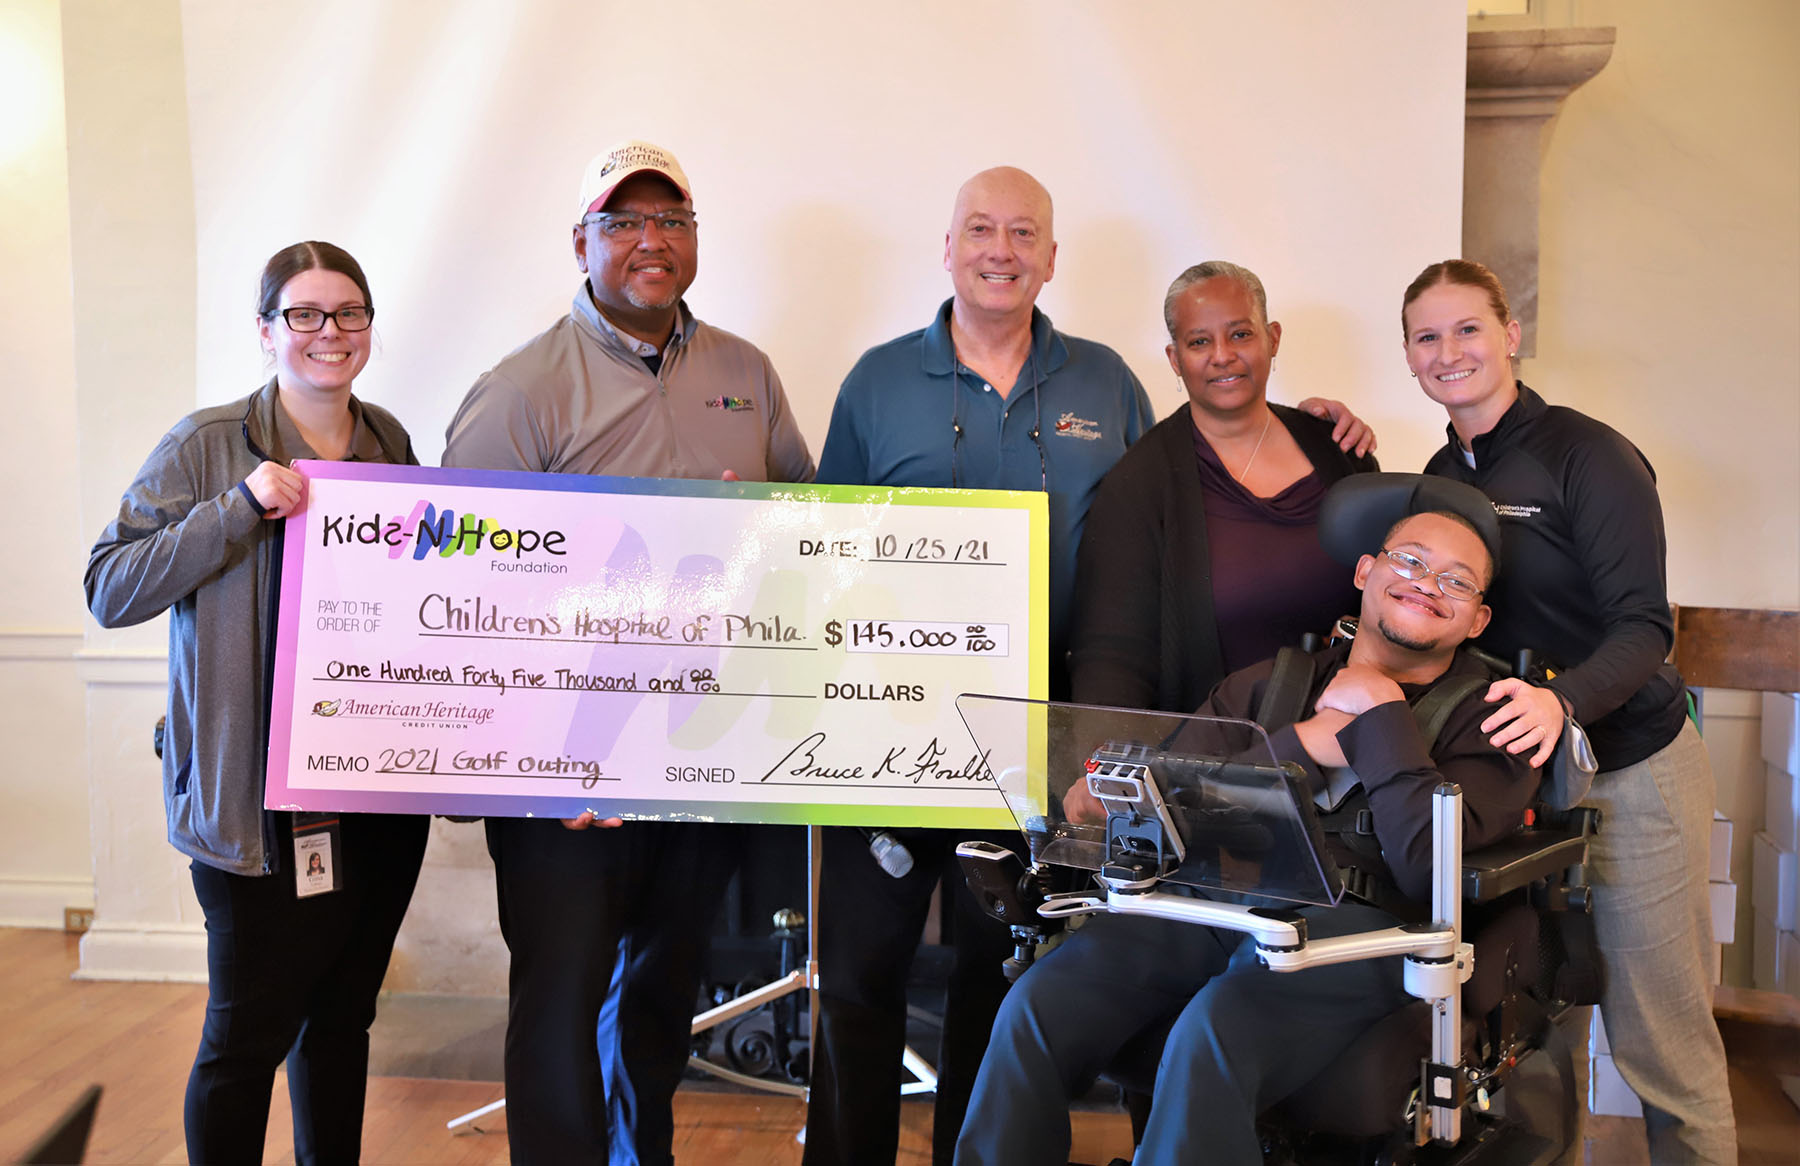 The Kids-N-Hope Foundation presents Children's Hospital of Philadelphia with a check for $145,000